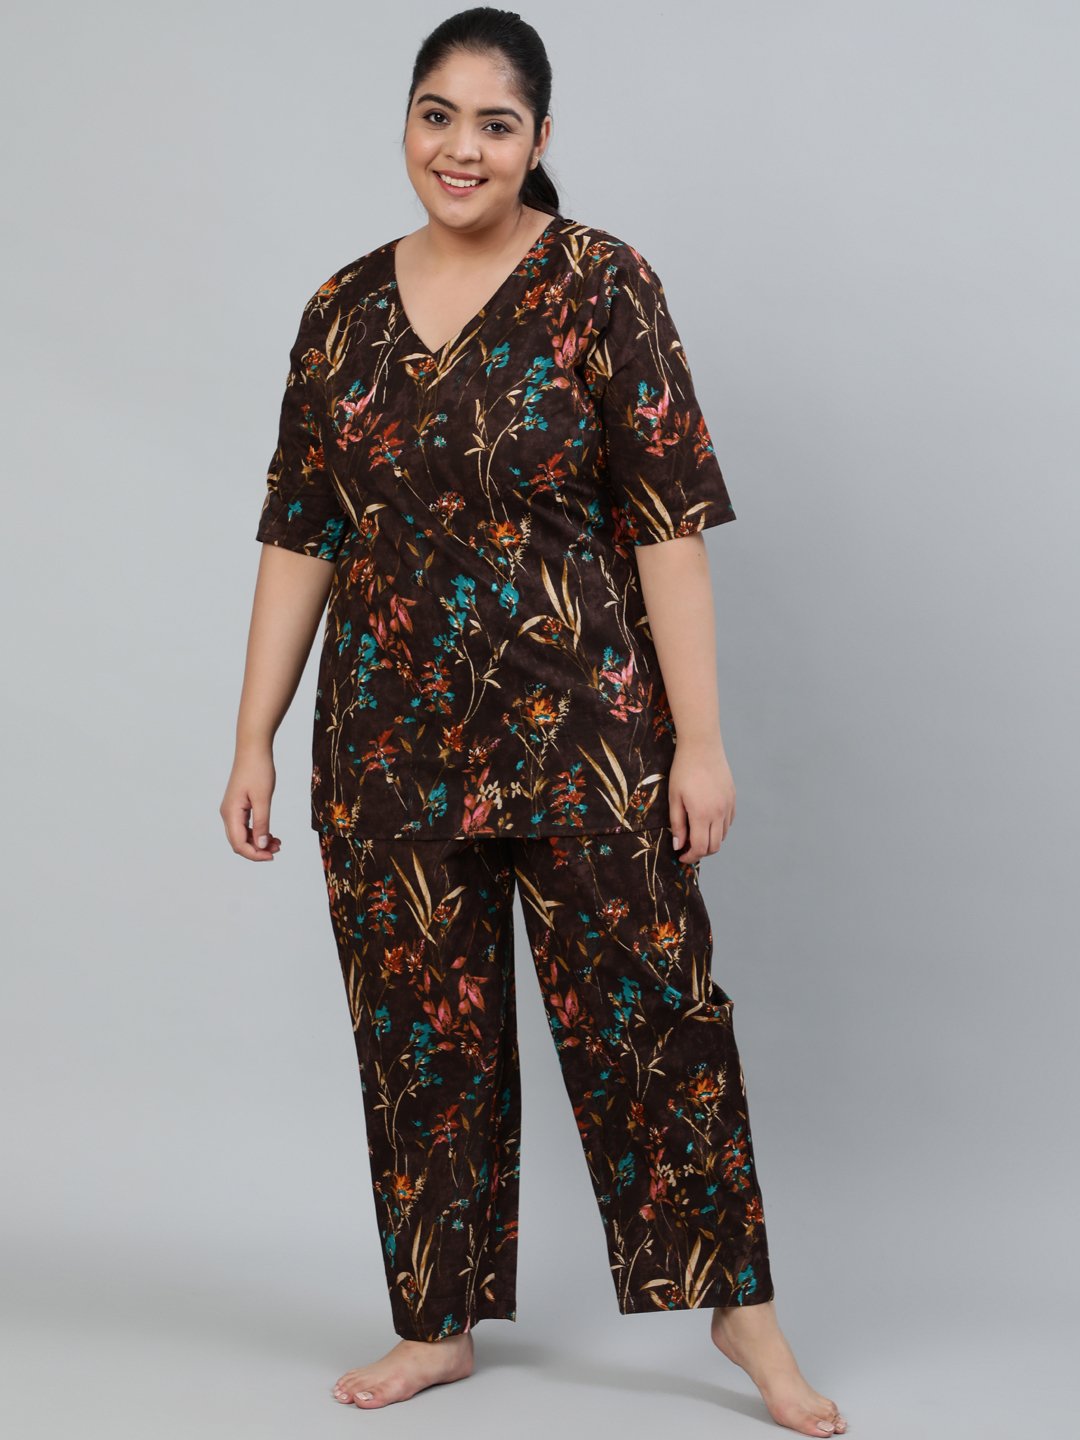 Women's Plus Size Brown Floral Printed Night Suit With Half Sleeves - Nayo Clothing